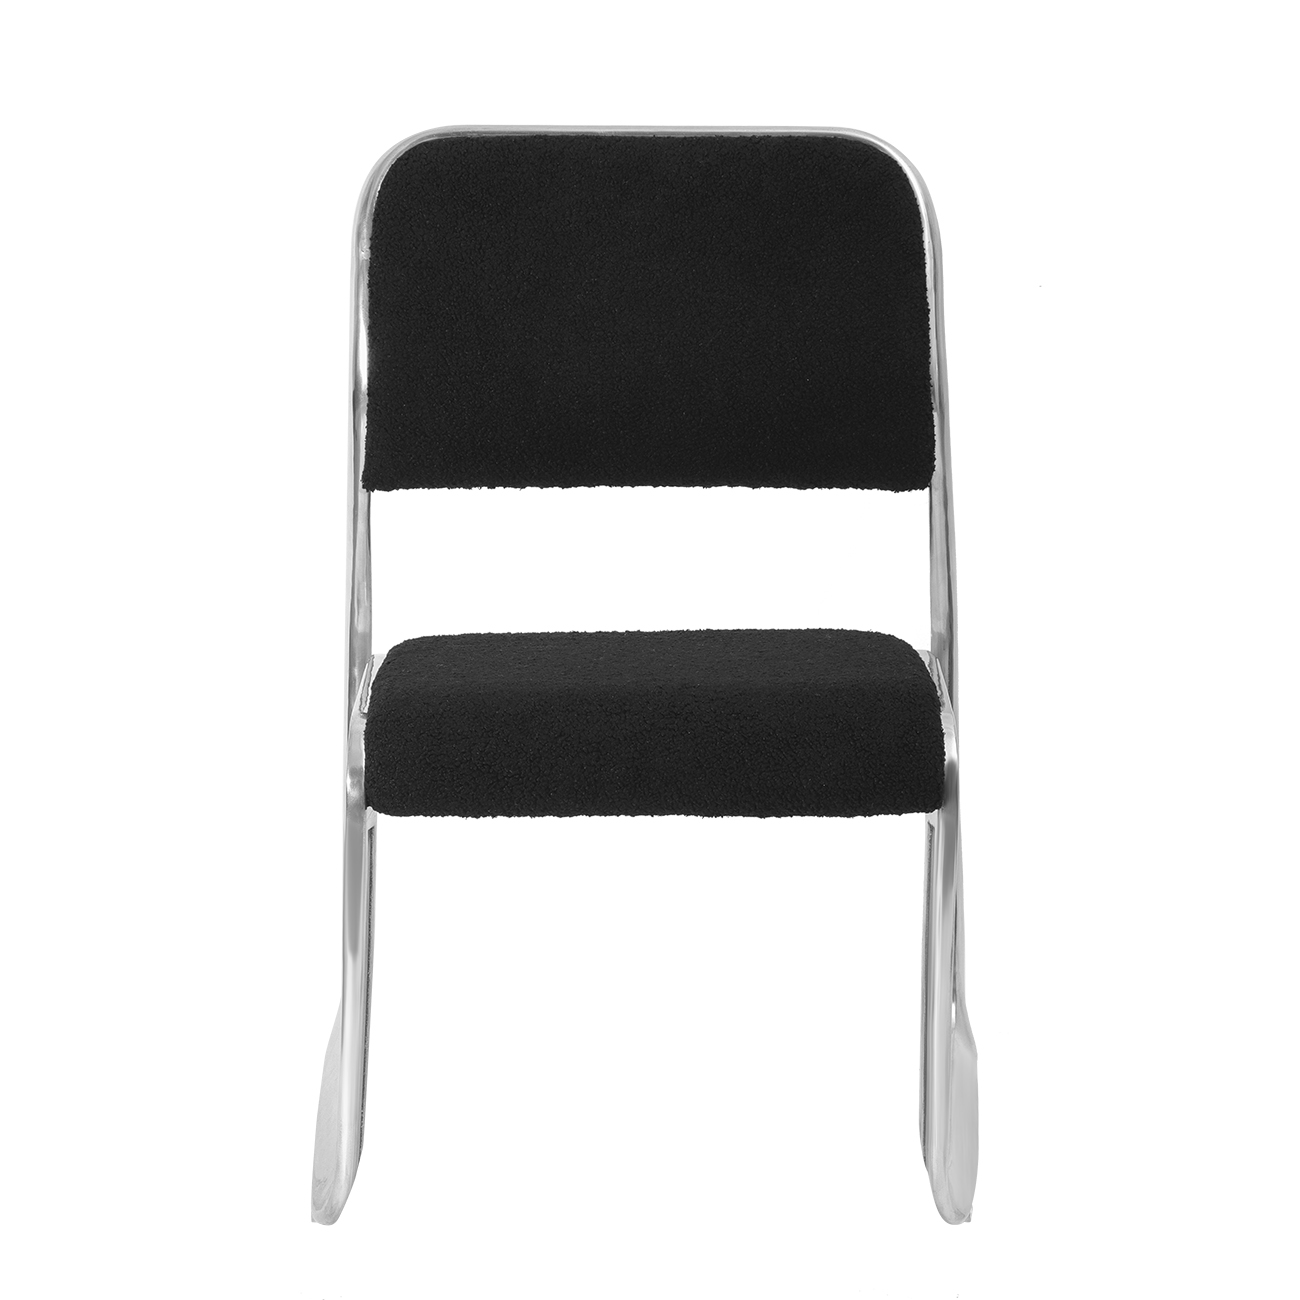 Metal Casting Chairs With Comfortable Cushion For Office Chair